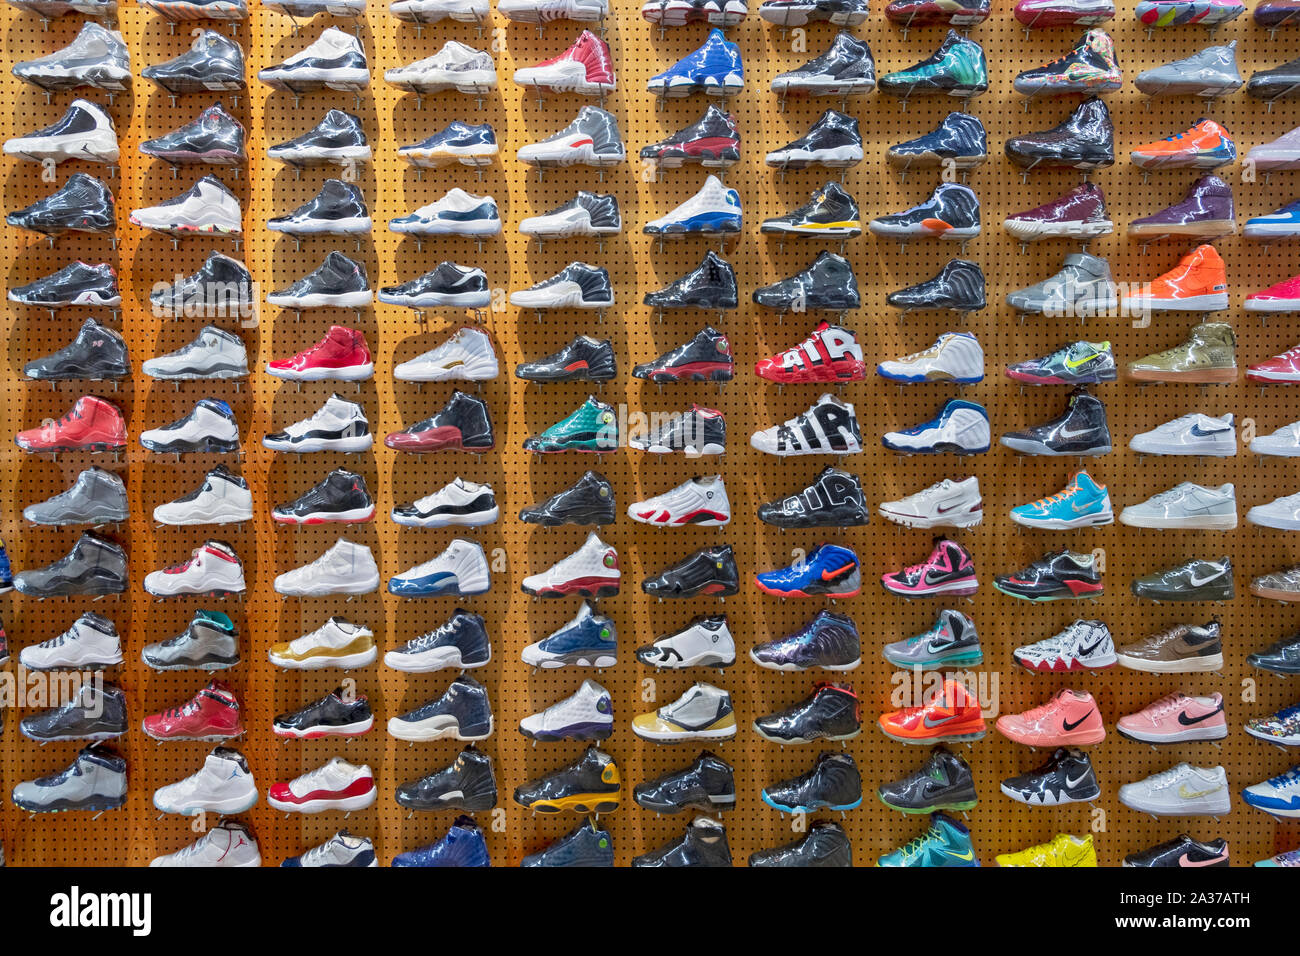 Display of rare & pricey athletic shoes displayed at The Flight Club on Broadway in Greenwich Village, New York City. Stock Photo